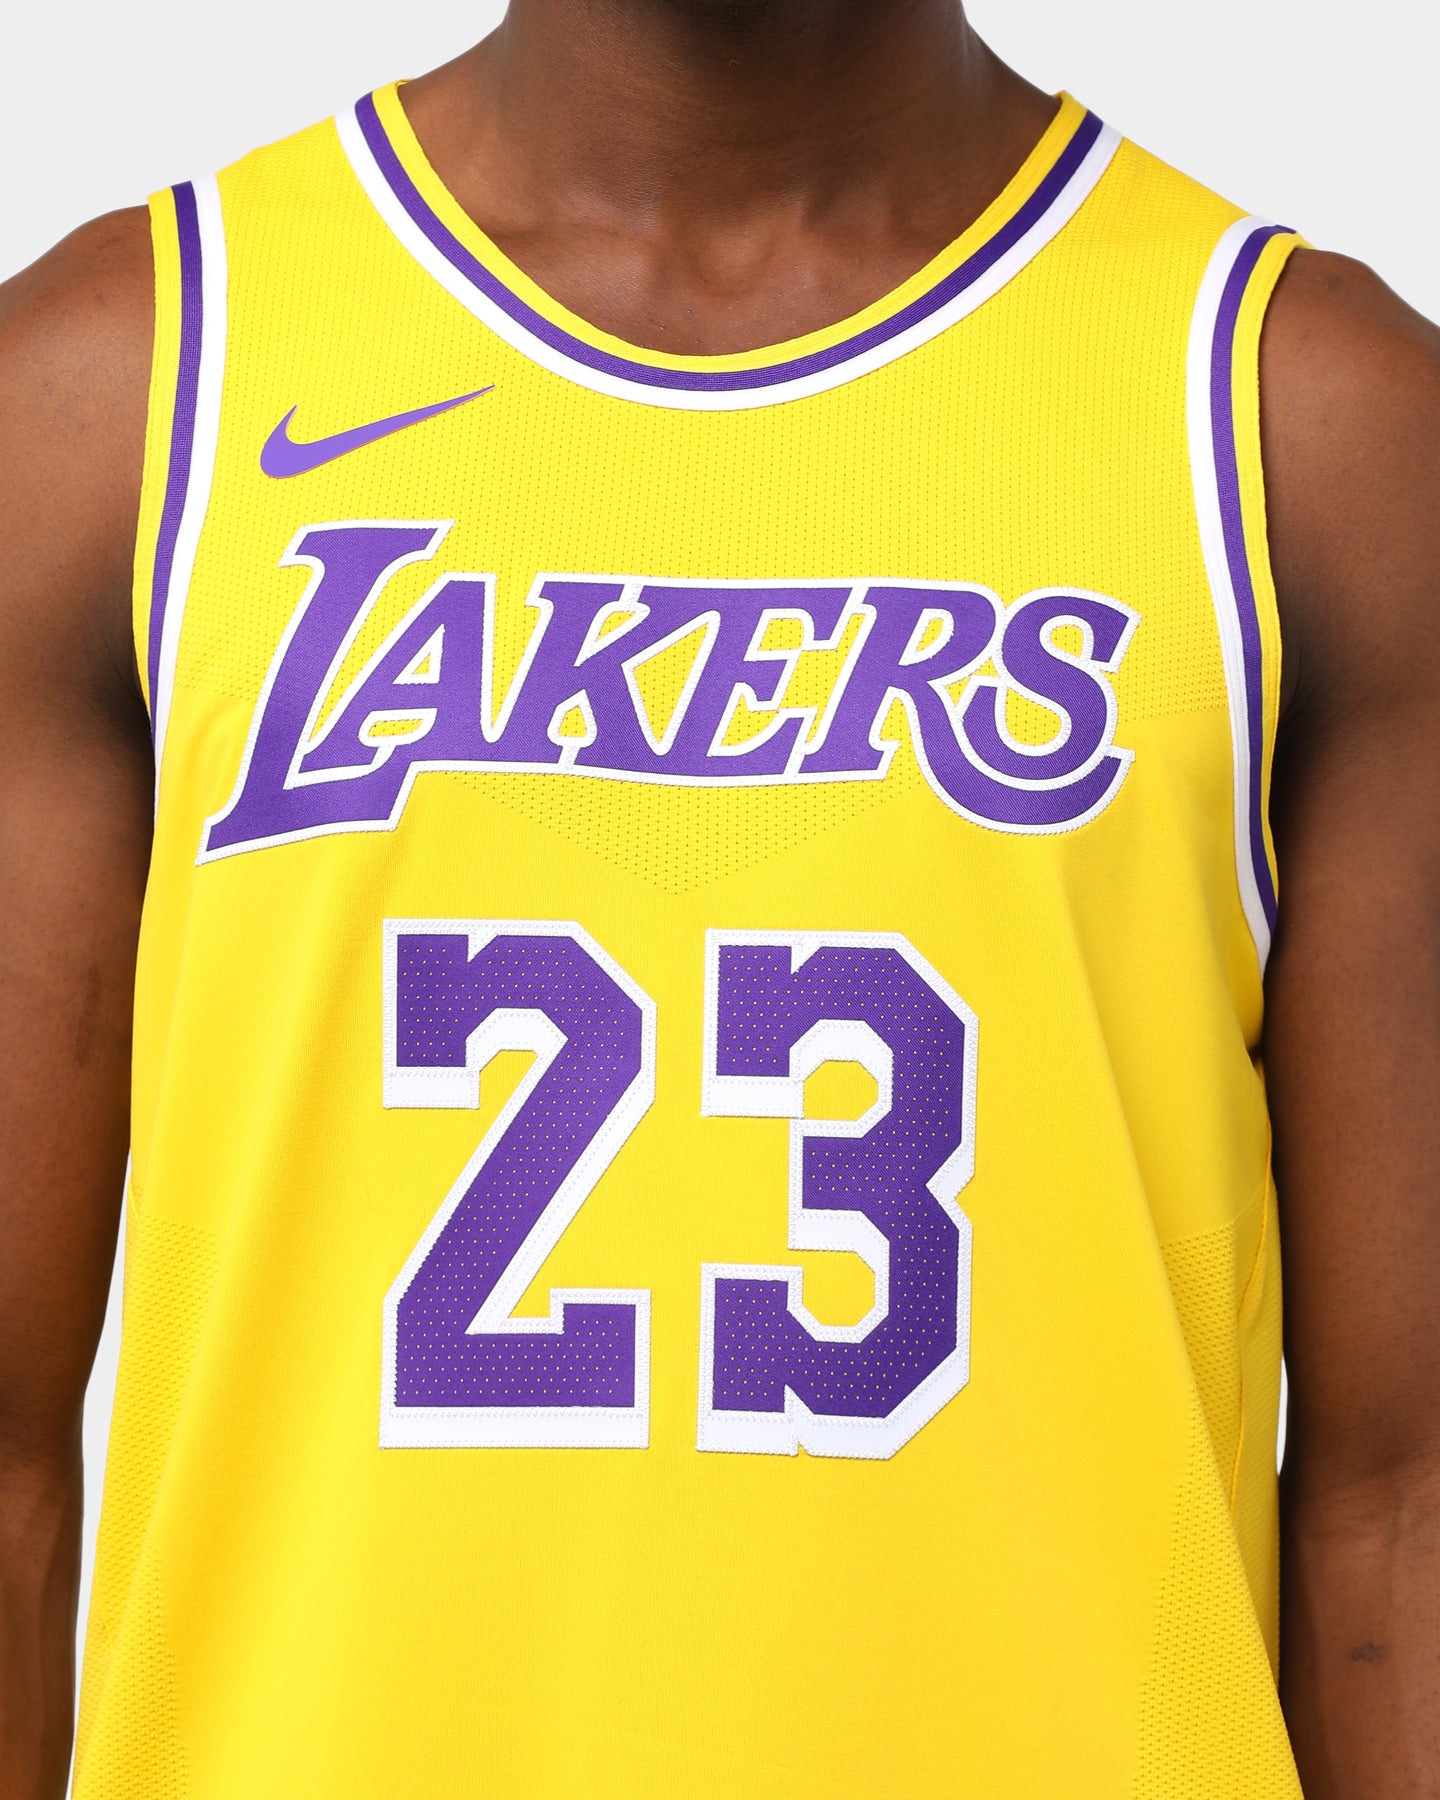 23 jersey lakers